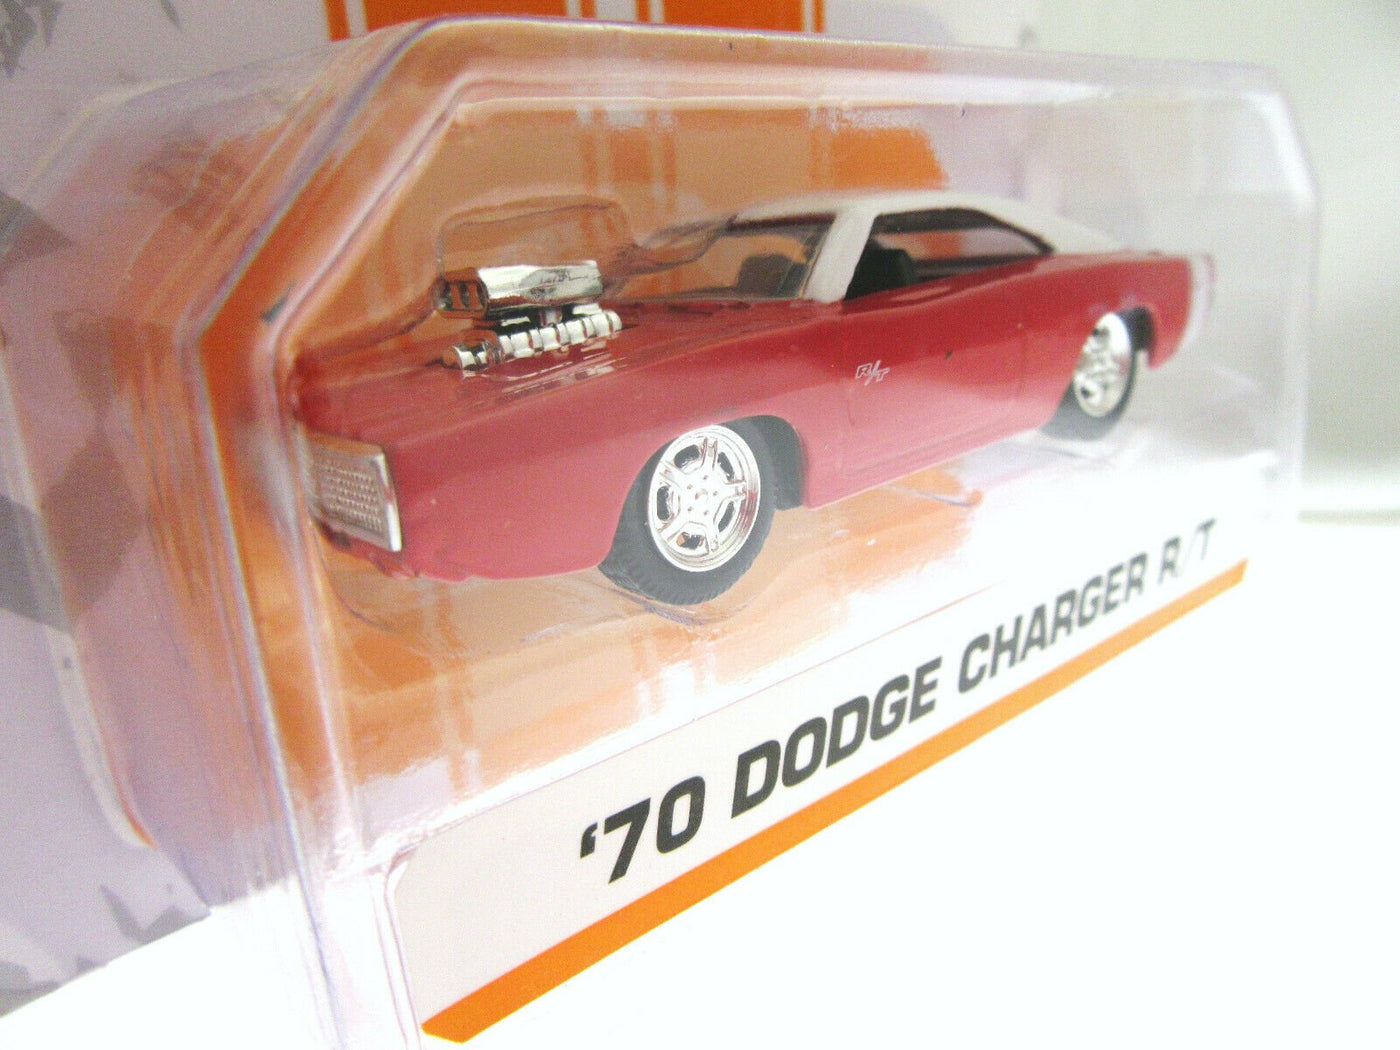 1970 Dodge Charger R/T ~ Red ~ Die Cast Metal ~ 1:60 Scale ~ Bigtime Muscle